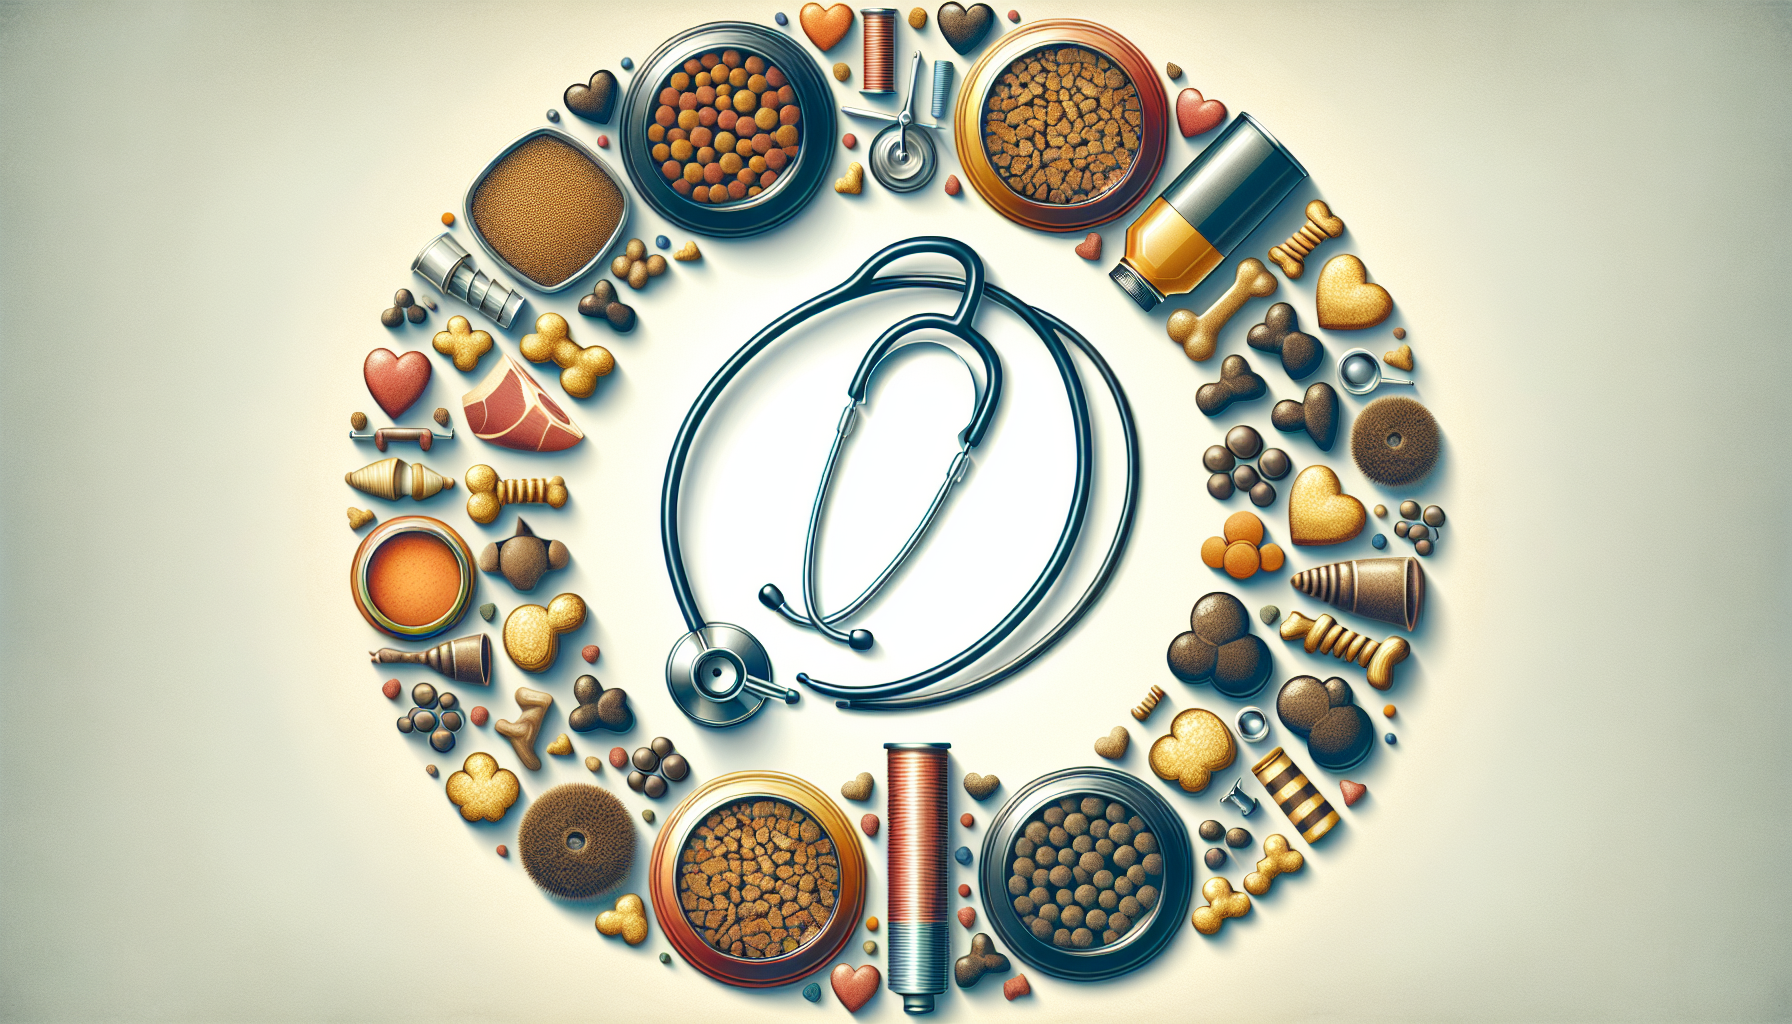 A variety of pet food and a veterinary stethoscope